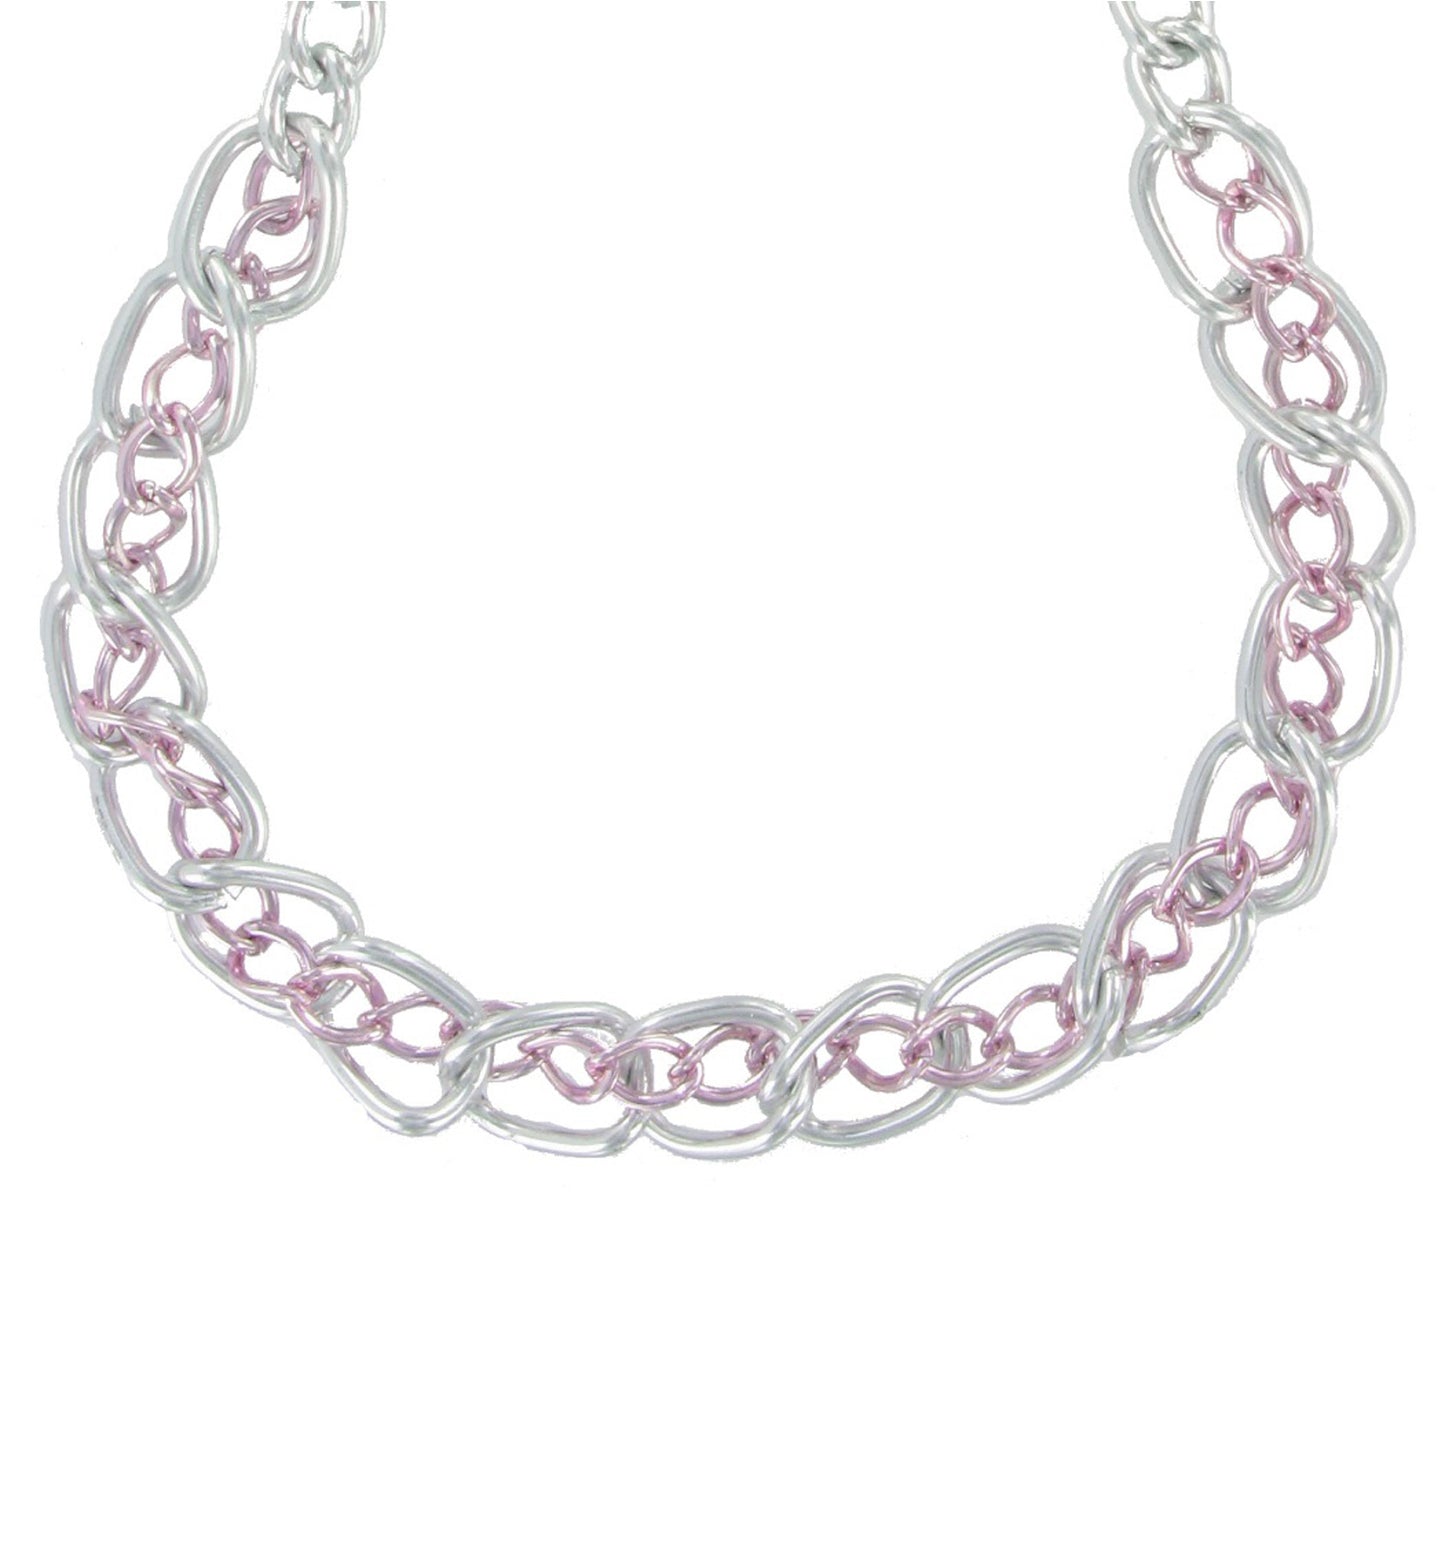 Silver Tone Pink Chunky Chain Link Statement Necklace 24"